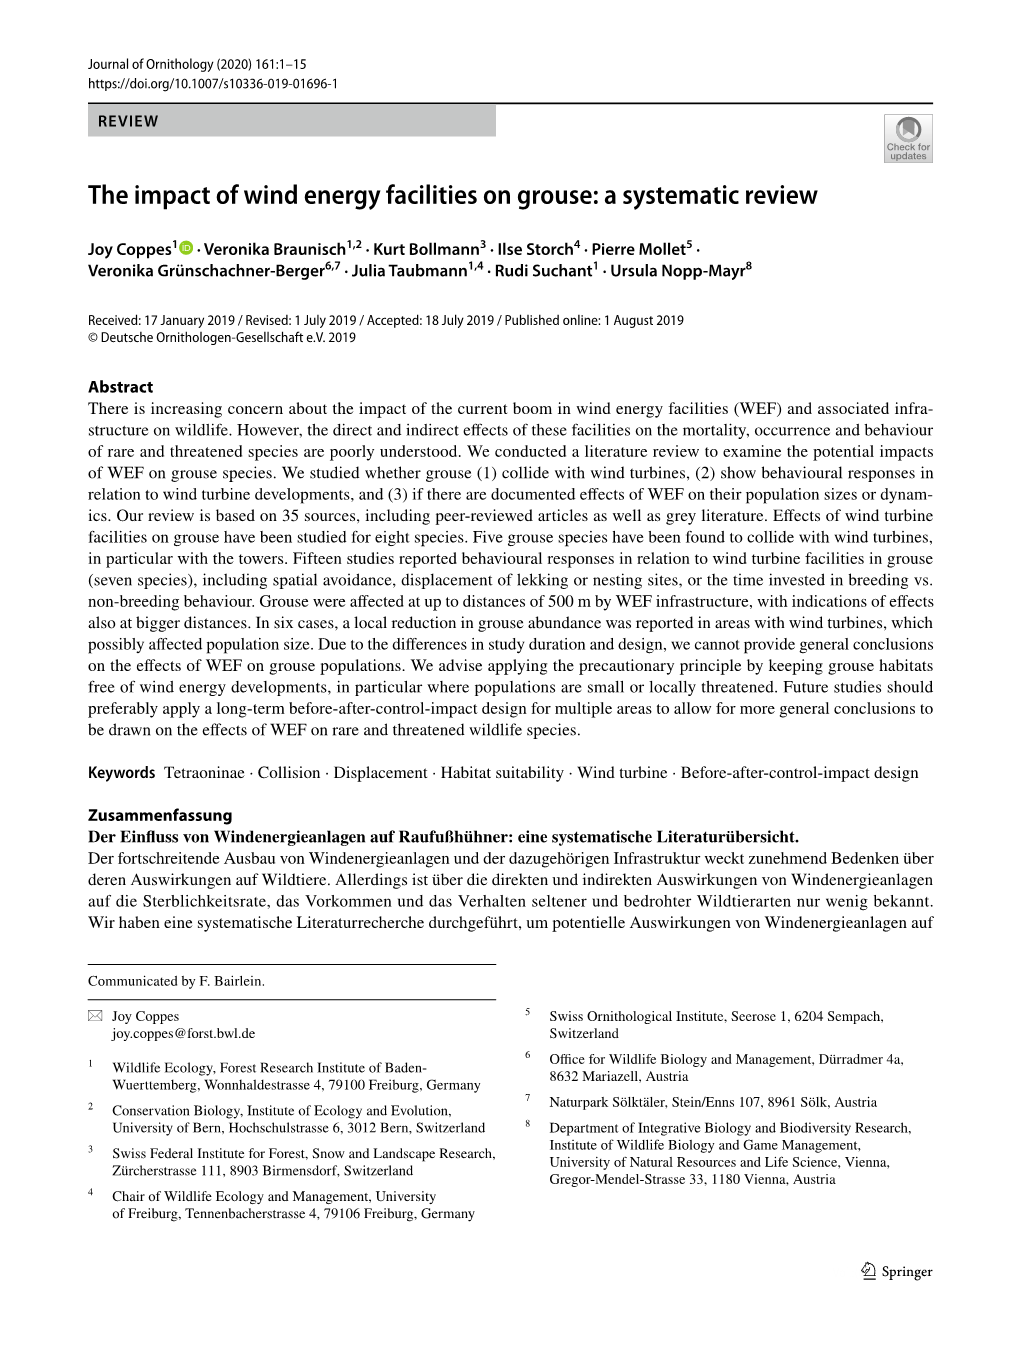 The Impact of Wind Energy Facilities on Grouse: a Systematic Review